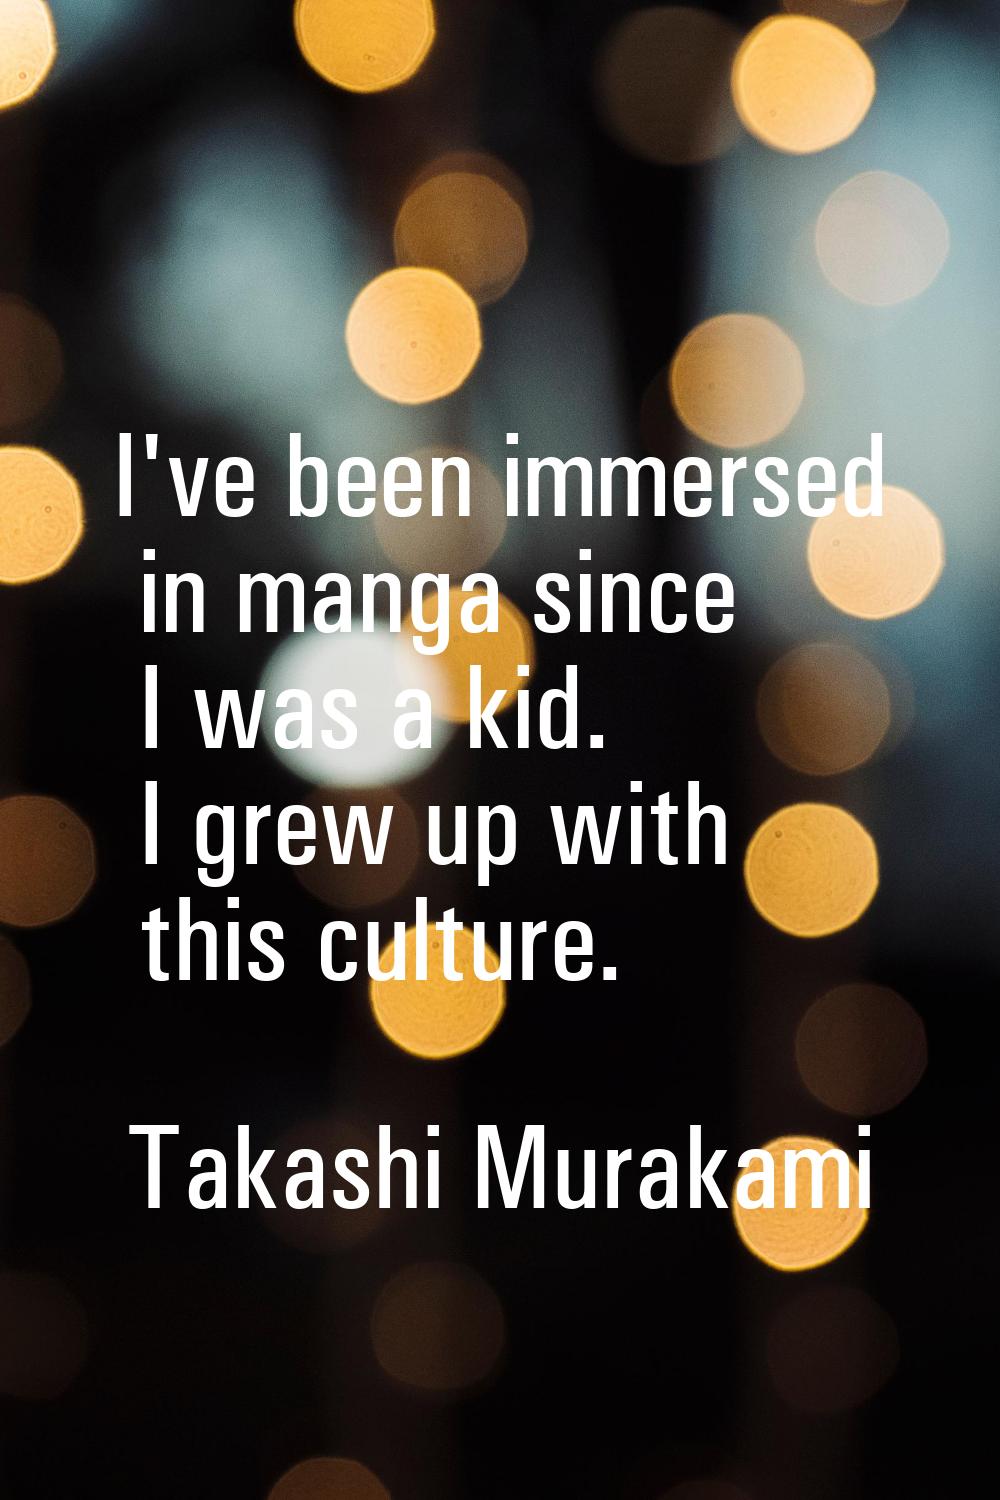 I've been immersed in manga since I was a kid. I grew up with this culture.